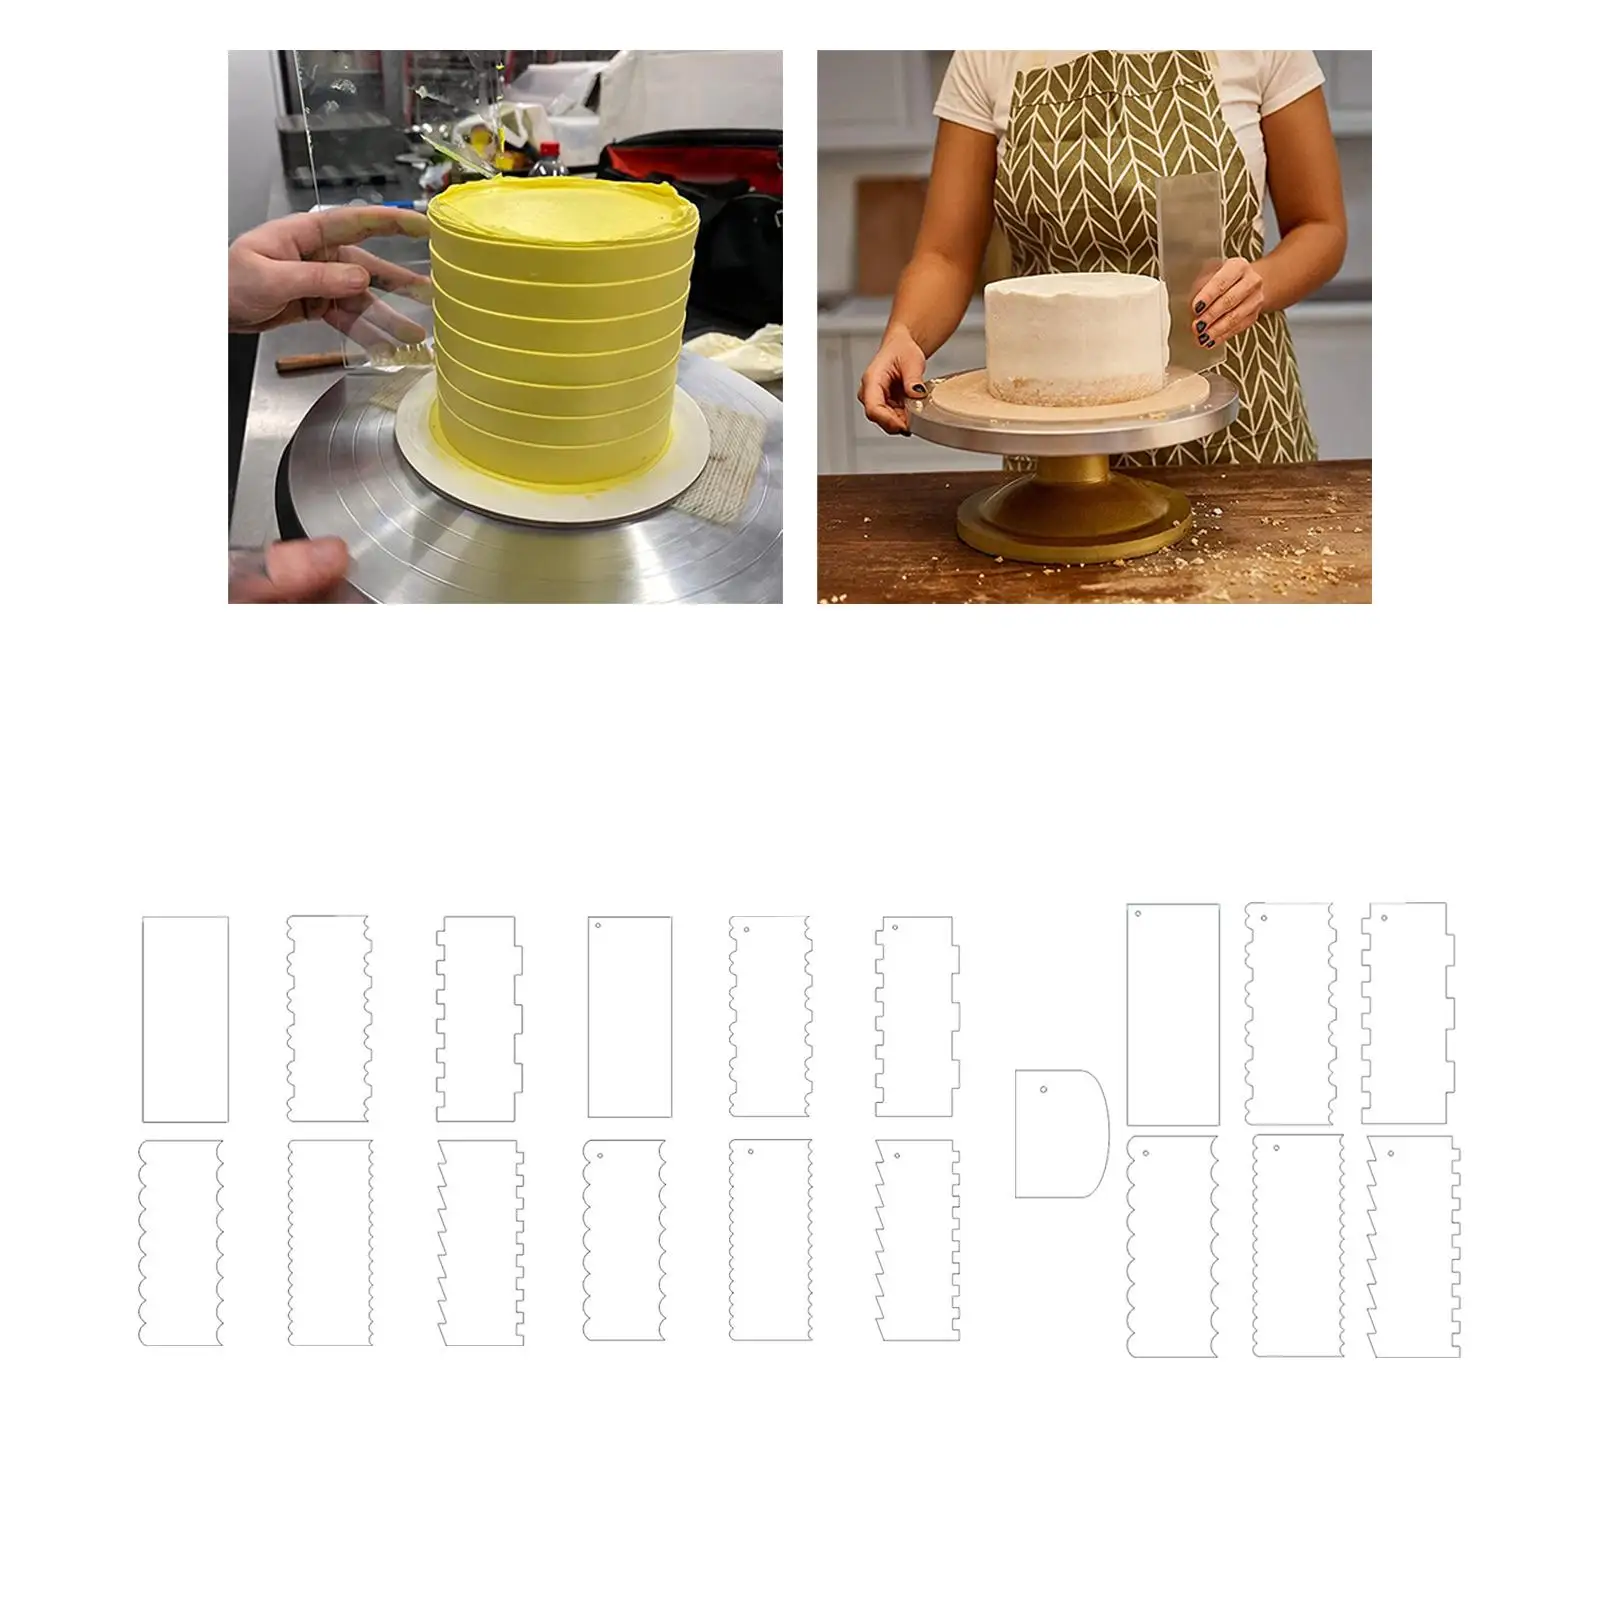 Cakes Smoother Cake Sculpting Decorating Supplies DIY Icing Frosting Double Sided Stripe Edge for Kitchen Wedding Cake Pastry